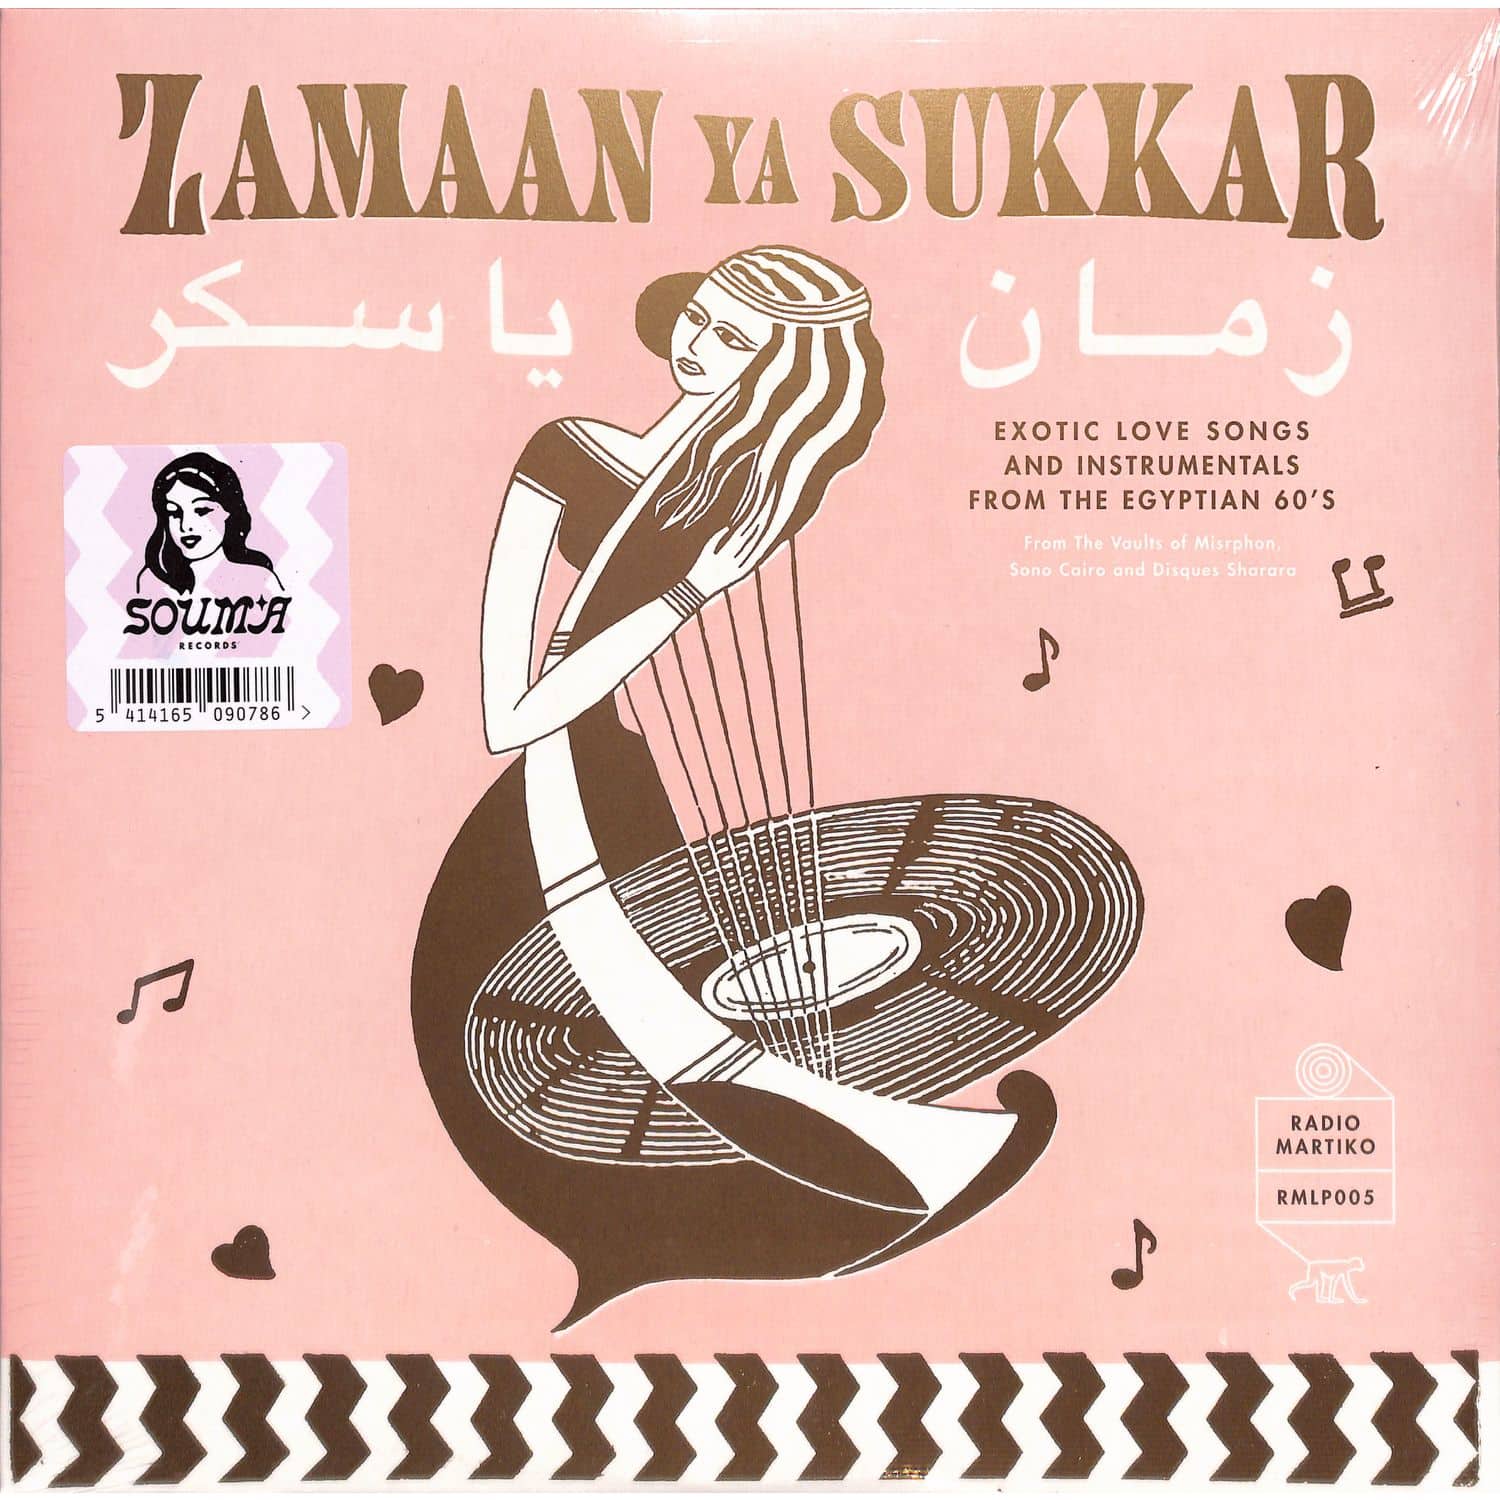 Various Artists - ZAMAAN YA SUKKAR - EXOTIC LOVE SONGS AND INSTRUMENTALS FROM THE EGYPTIAN 60S 